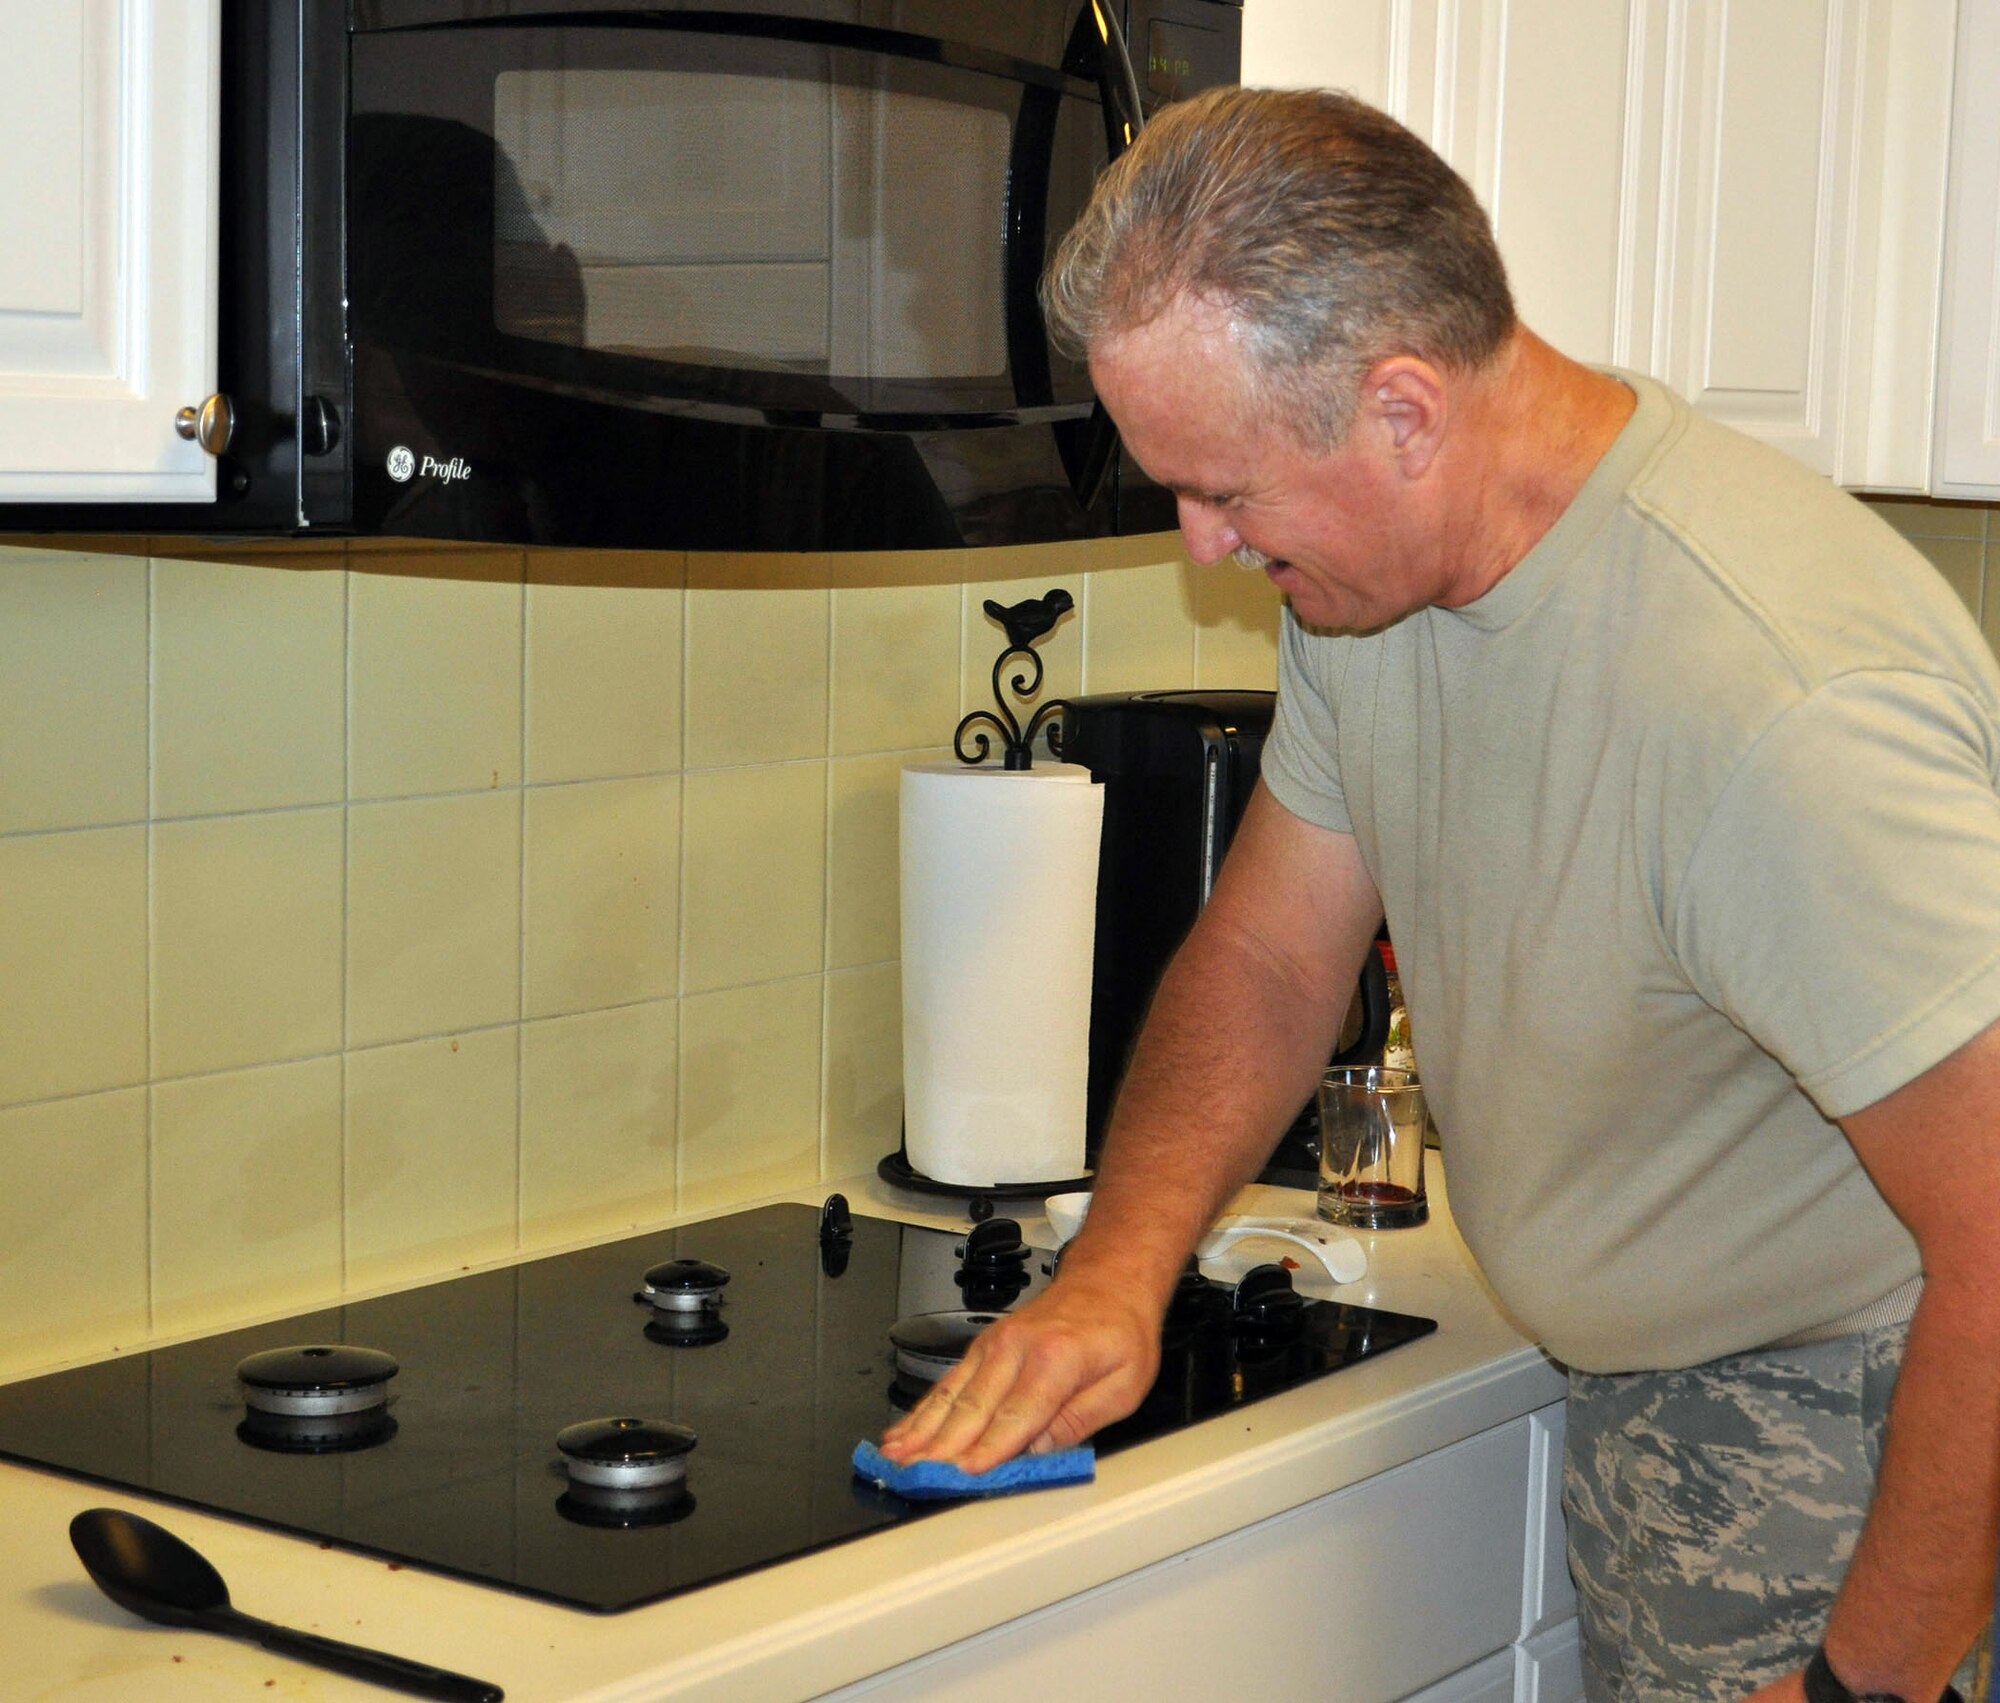 TRAVIS AIR FORCE BASE, Calif. -- Chief Master Sgt. David Lafferty applies some "elbow grease" to the stove cleanup in the kitchen of the Travis Fisher House Aug. 29. The reservists of the 312th Airlift Squadron volunteered to prepare a pasta feast for the families staying here to be close to loved ones getting medical treatment at David Grant Medical Center. "It's fun, we really enjoy doing this," said Lafferty. (U.S. Air Force photo/Ellen Hatfield)